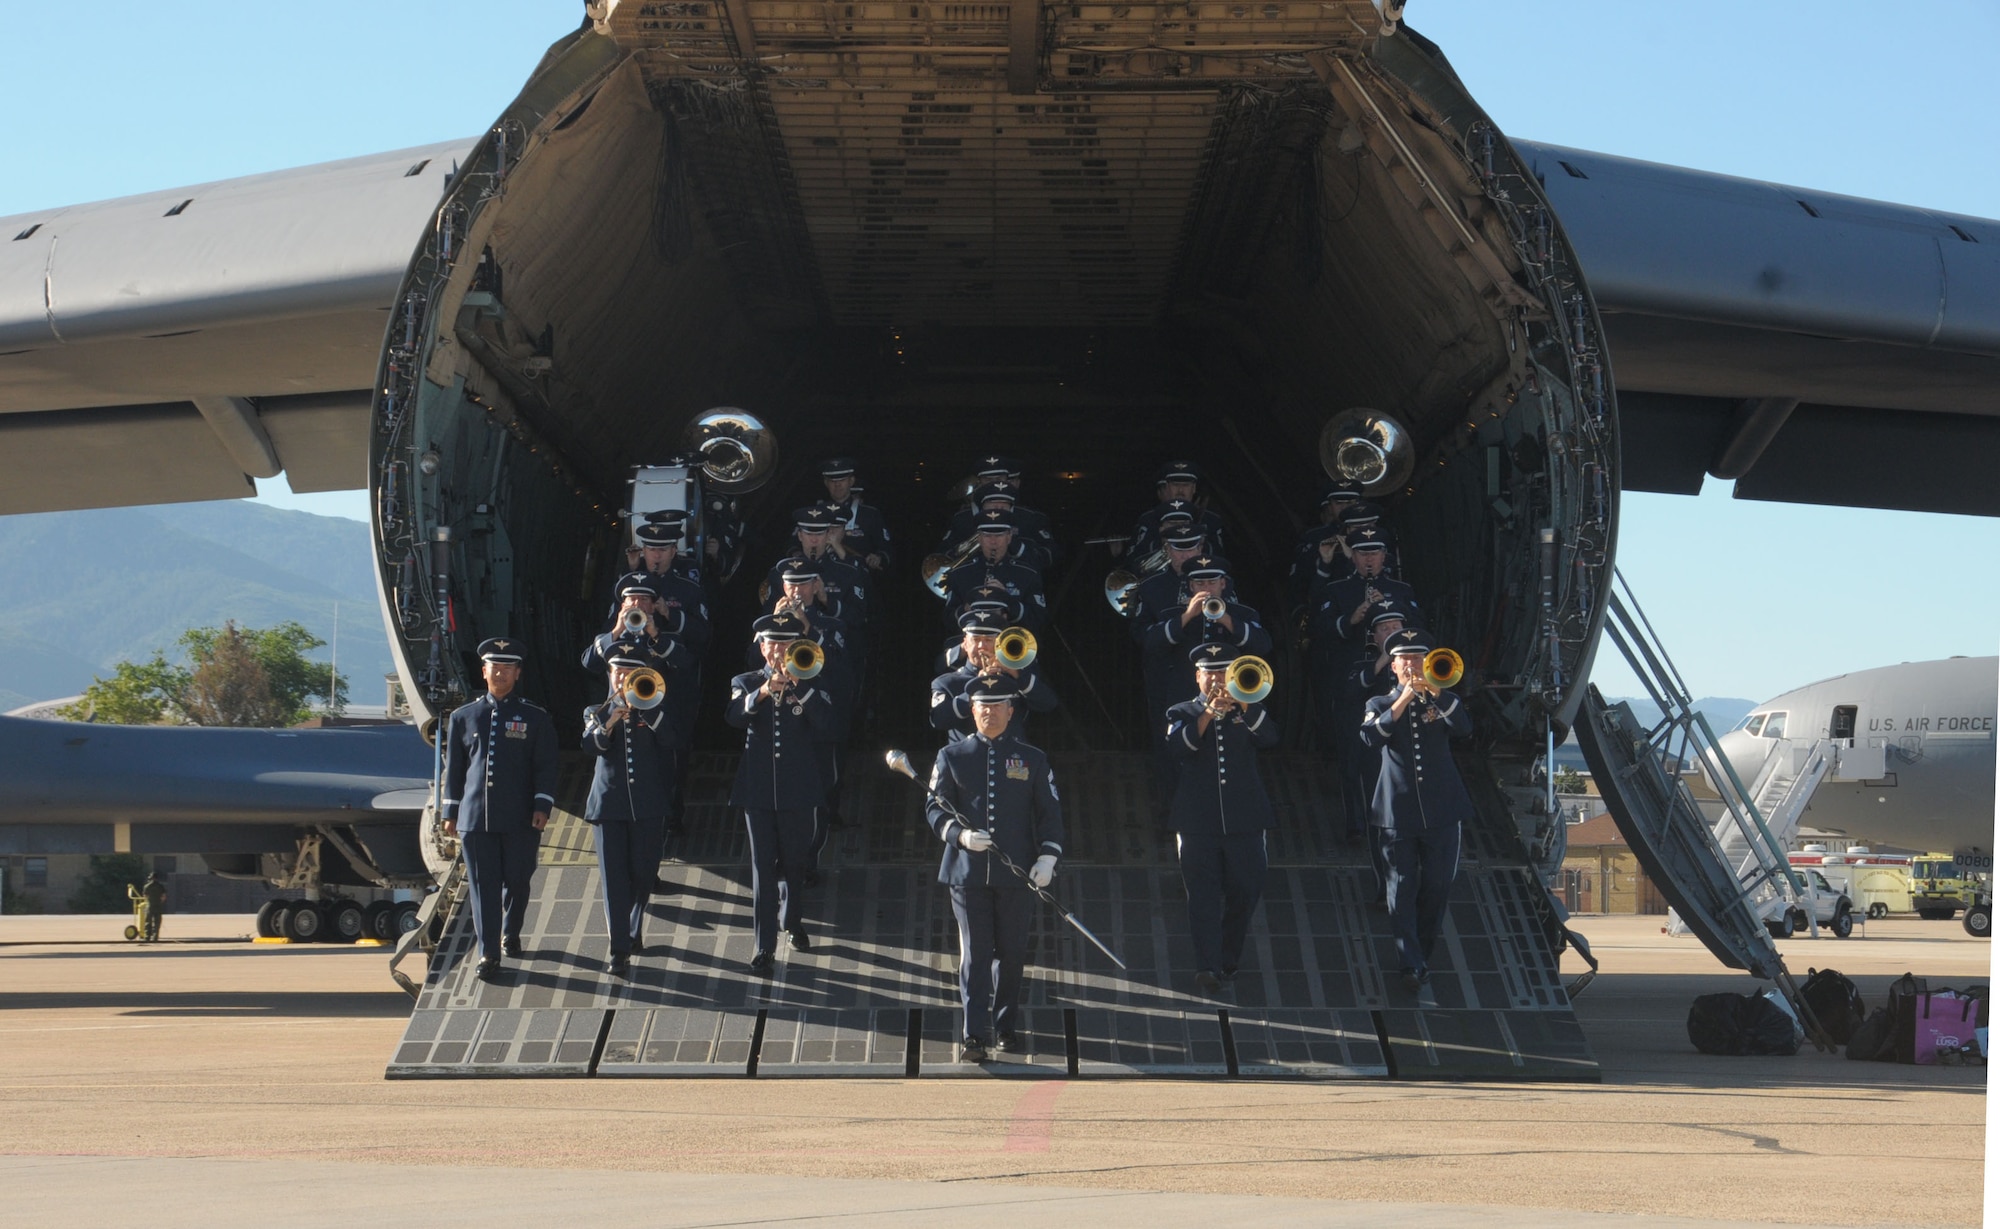 The Air National Guard Band of the West Coast marches out of a C-5 Galaxy at Hill Air Force Base in Layton, Utah on June 30, 2014. (U.S. Air National Guard photo by Airman 1st Class Madeleine Richards/Released)

